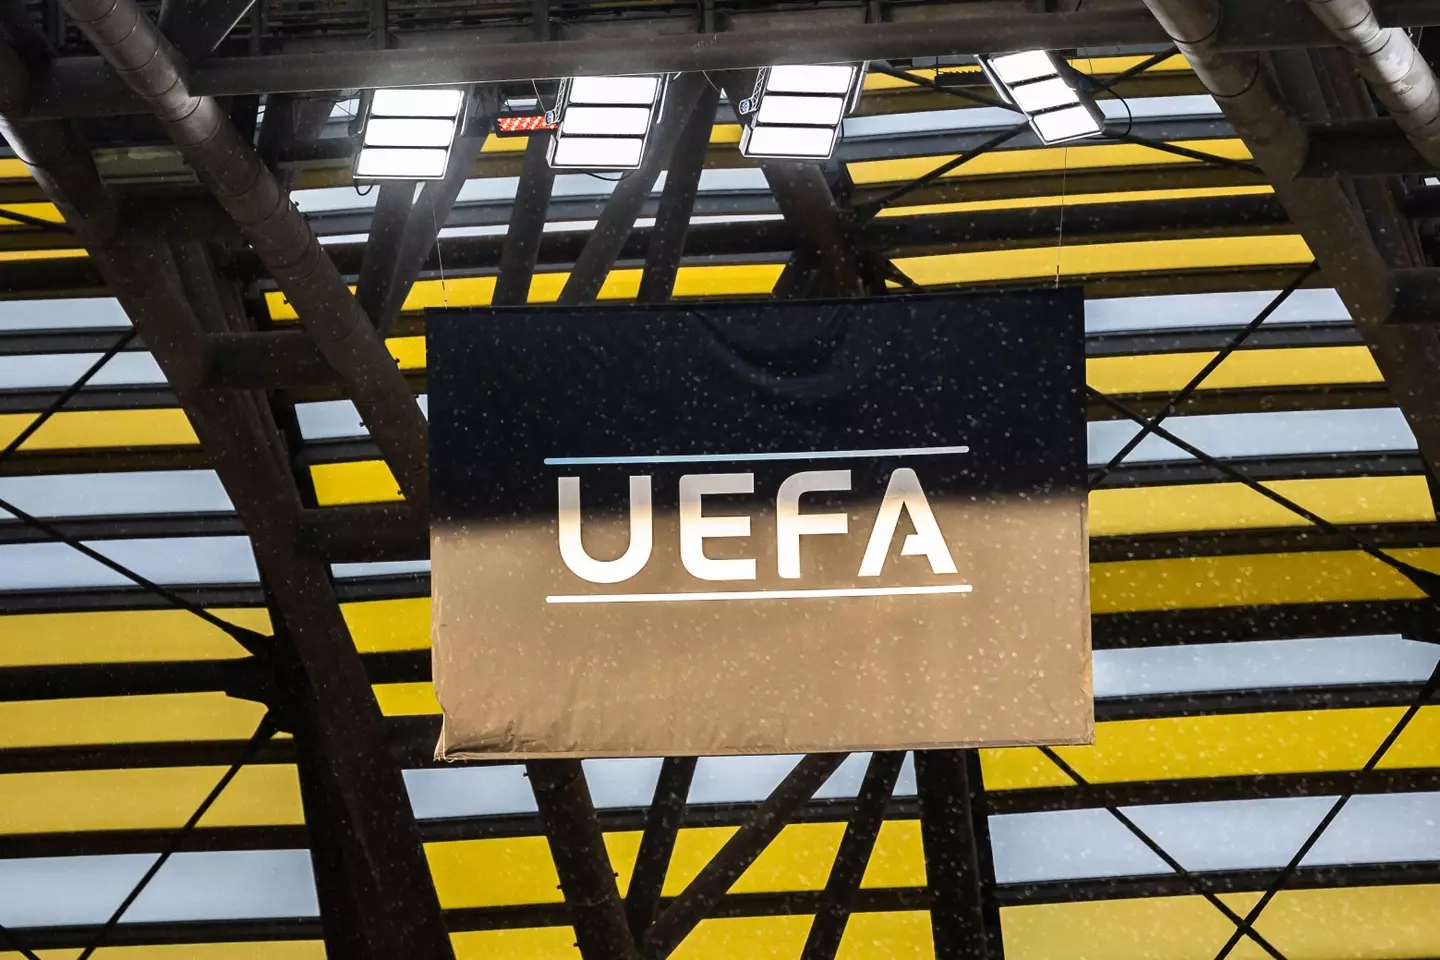 UEFA logo seen during the UEFA Europa League Final 2021 match cup awarding ceremony between Villarreal CF and Manchester United. (Alamy)